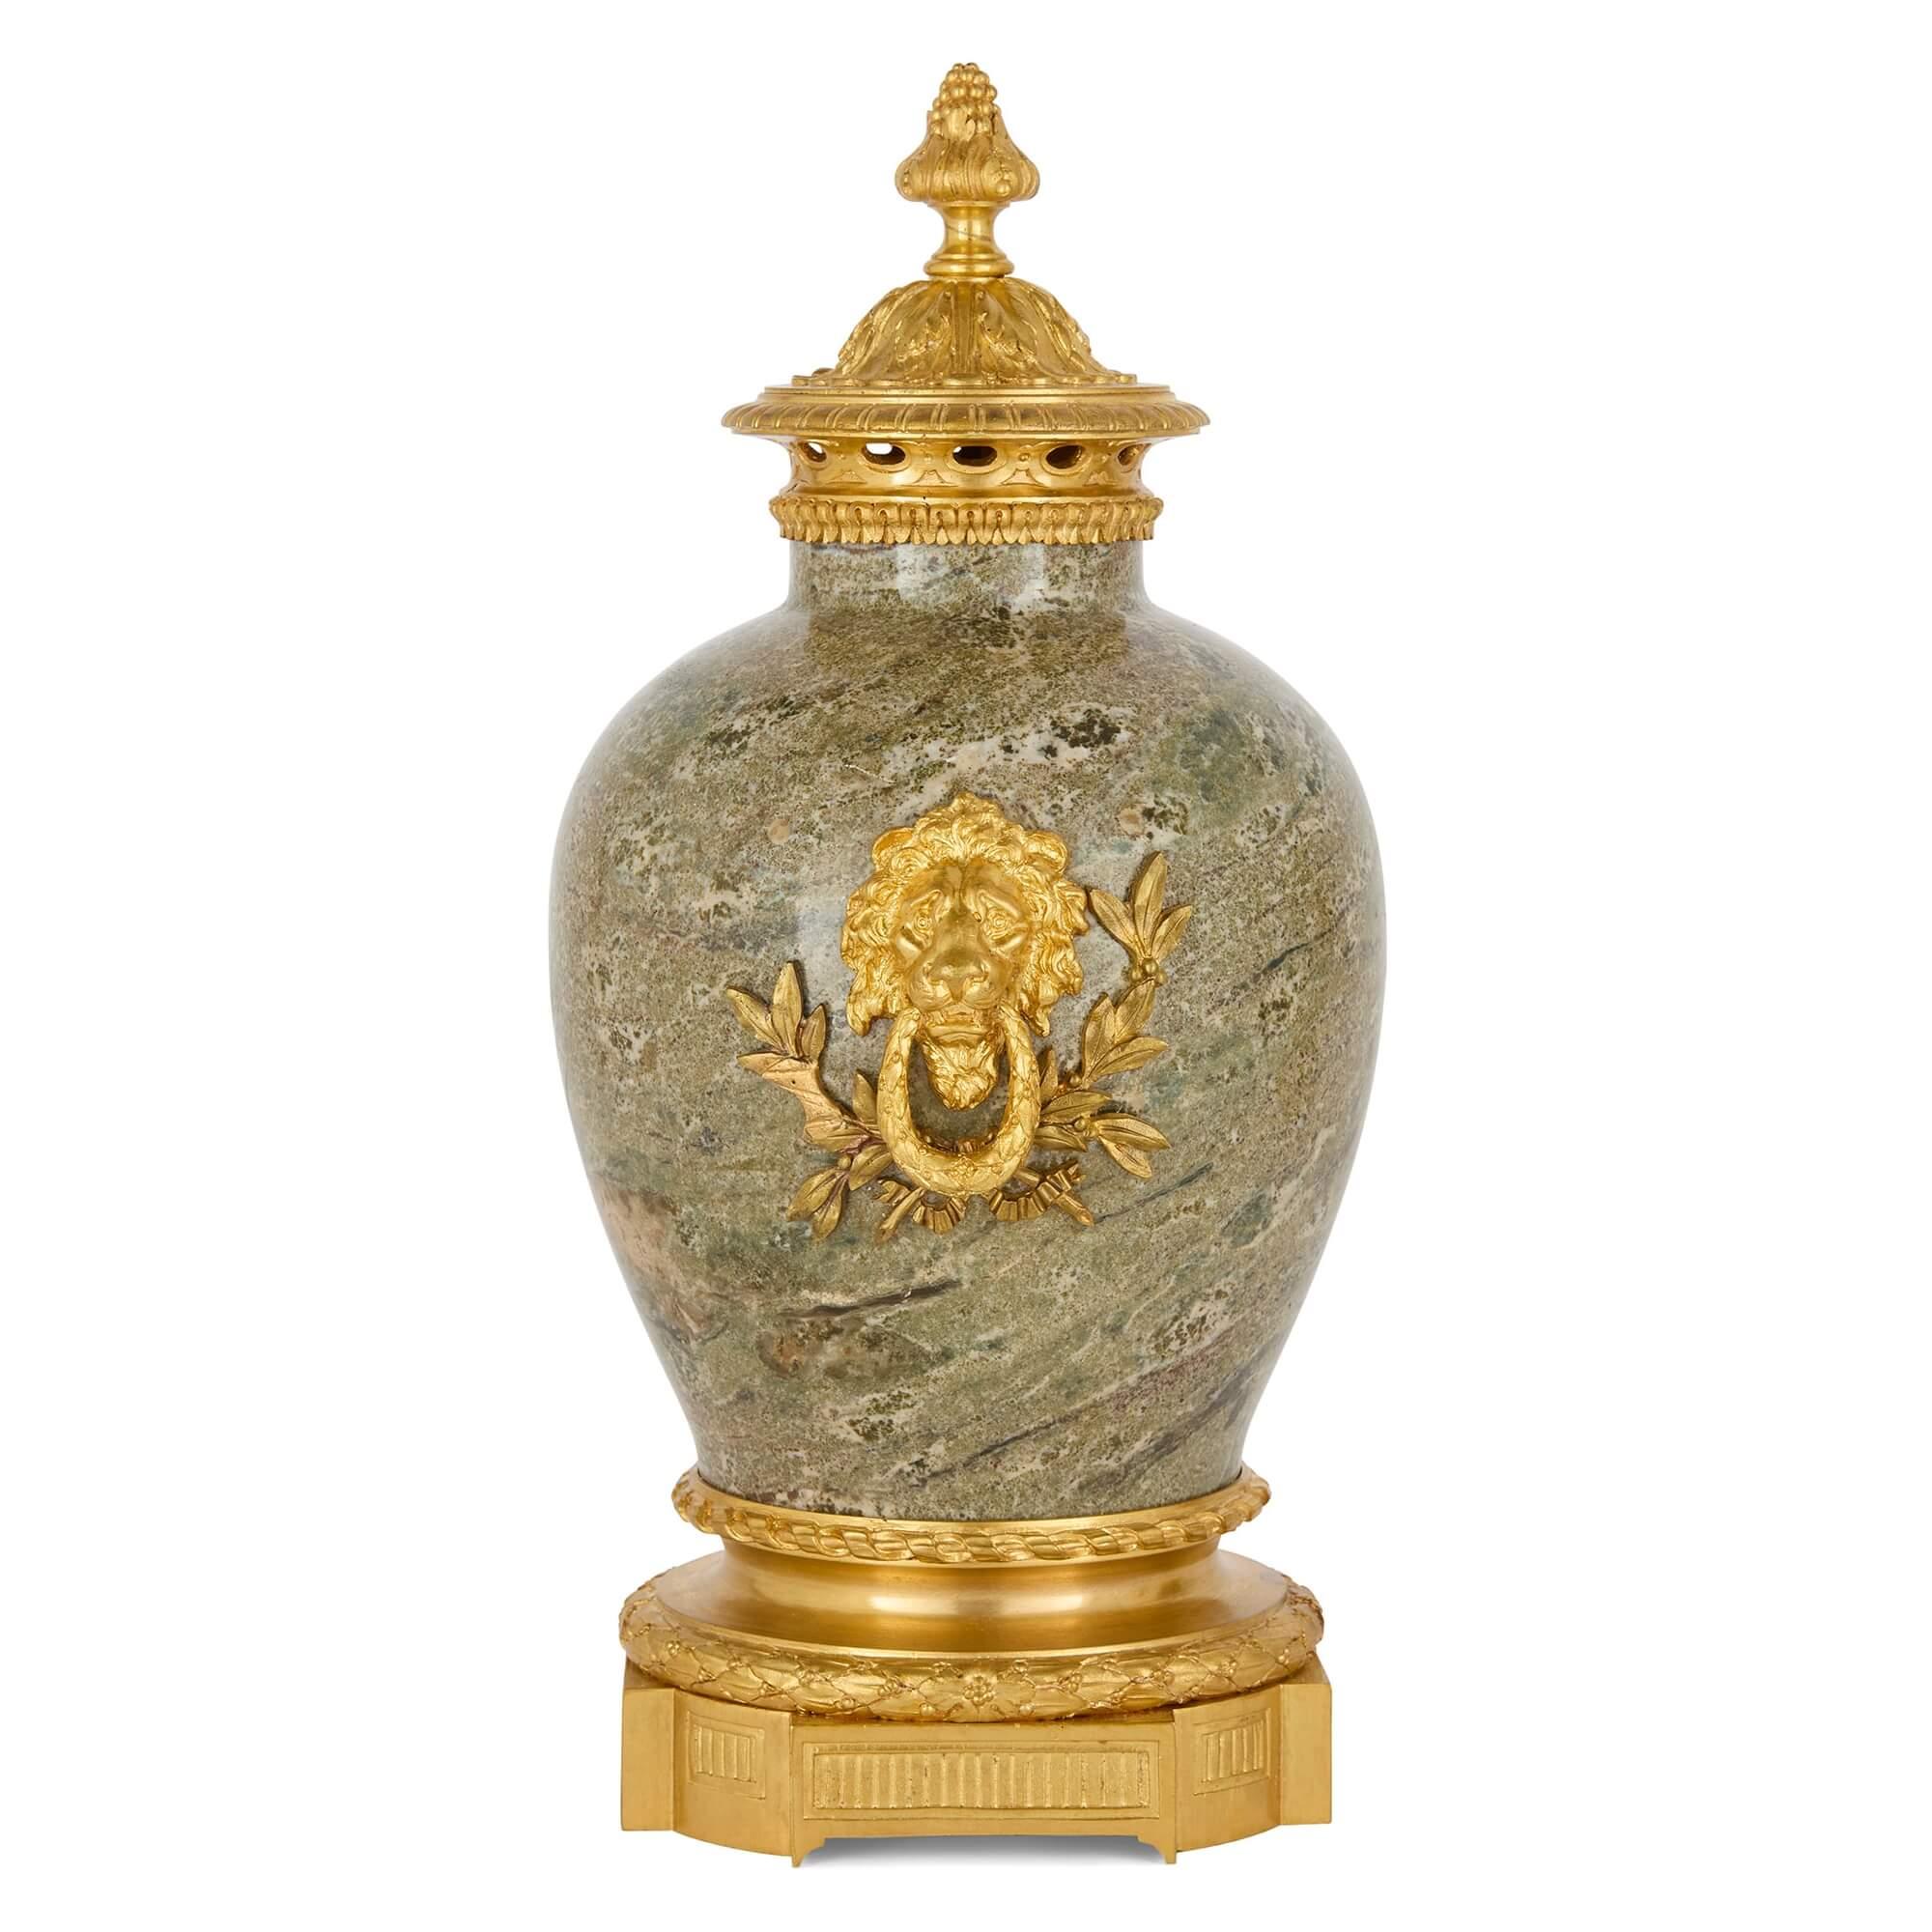 Pair of Empire-style marble and ormolu vases by Raingo 
French, Late 19th Century 
Height 37cm, width 22cm, depth 18cm

This superb pair of vases combines stunning veined grey marble with shining gilt-bronze mounts, which are designed by Raingo